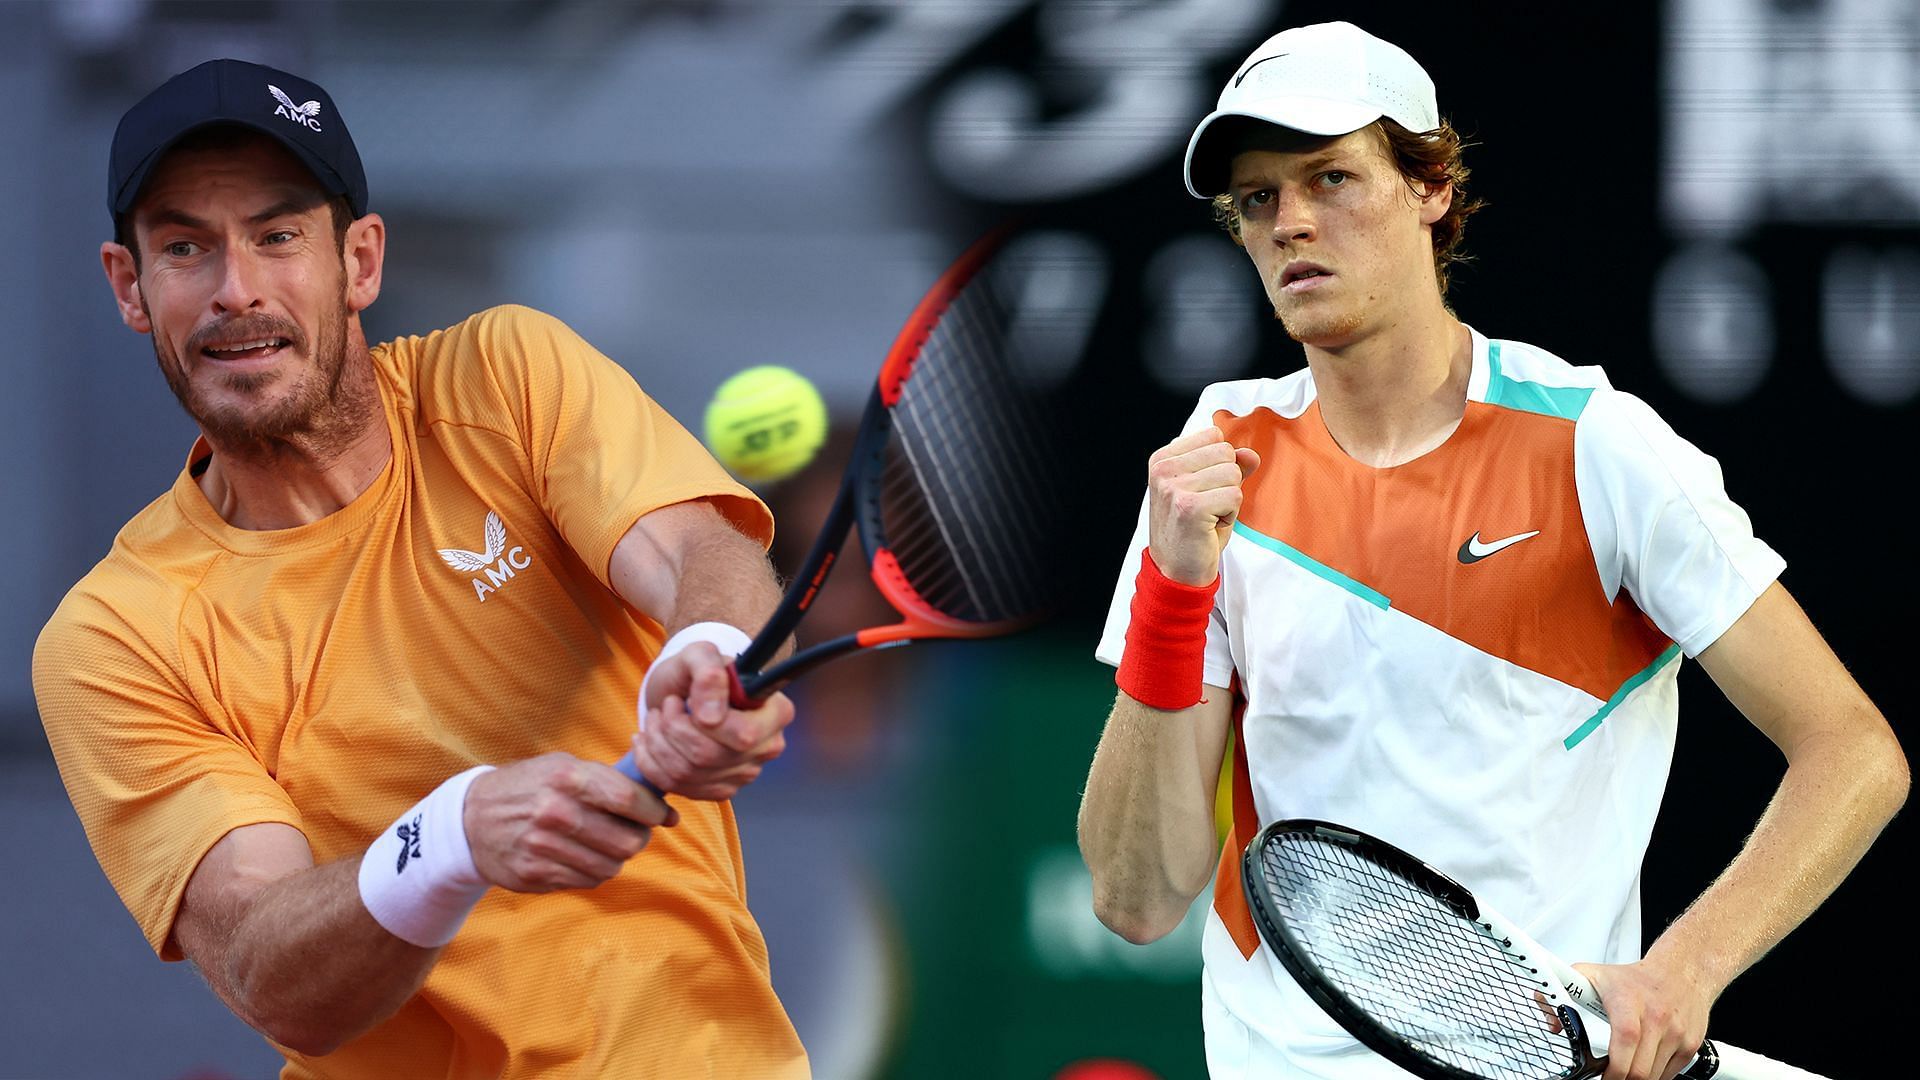 Andy Murray vs Jannik Sinner is one of the third-round matches at the Canadian Open